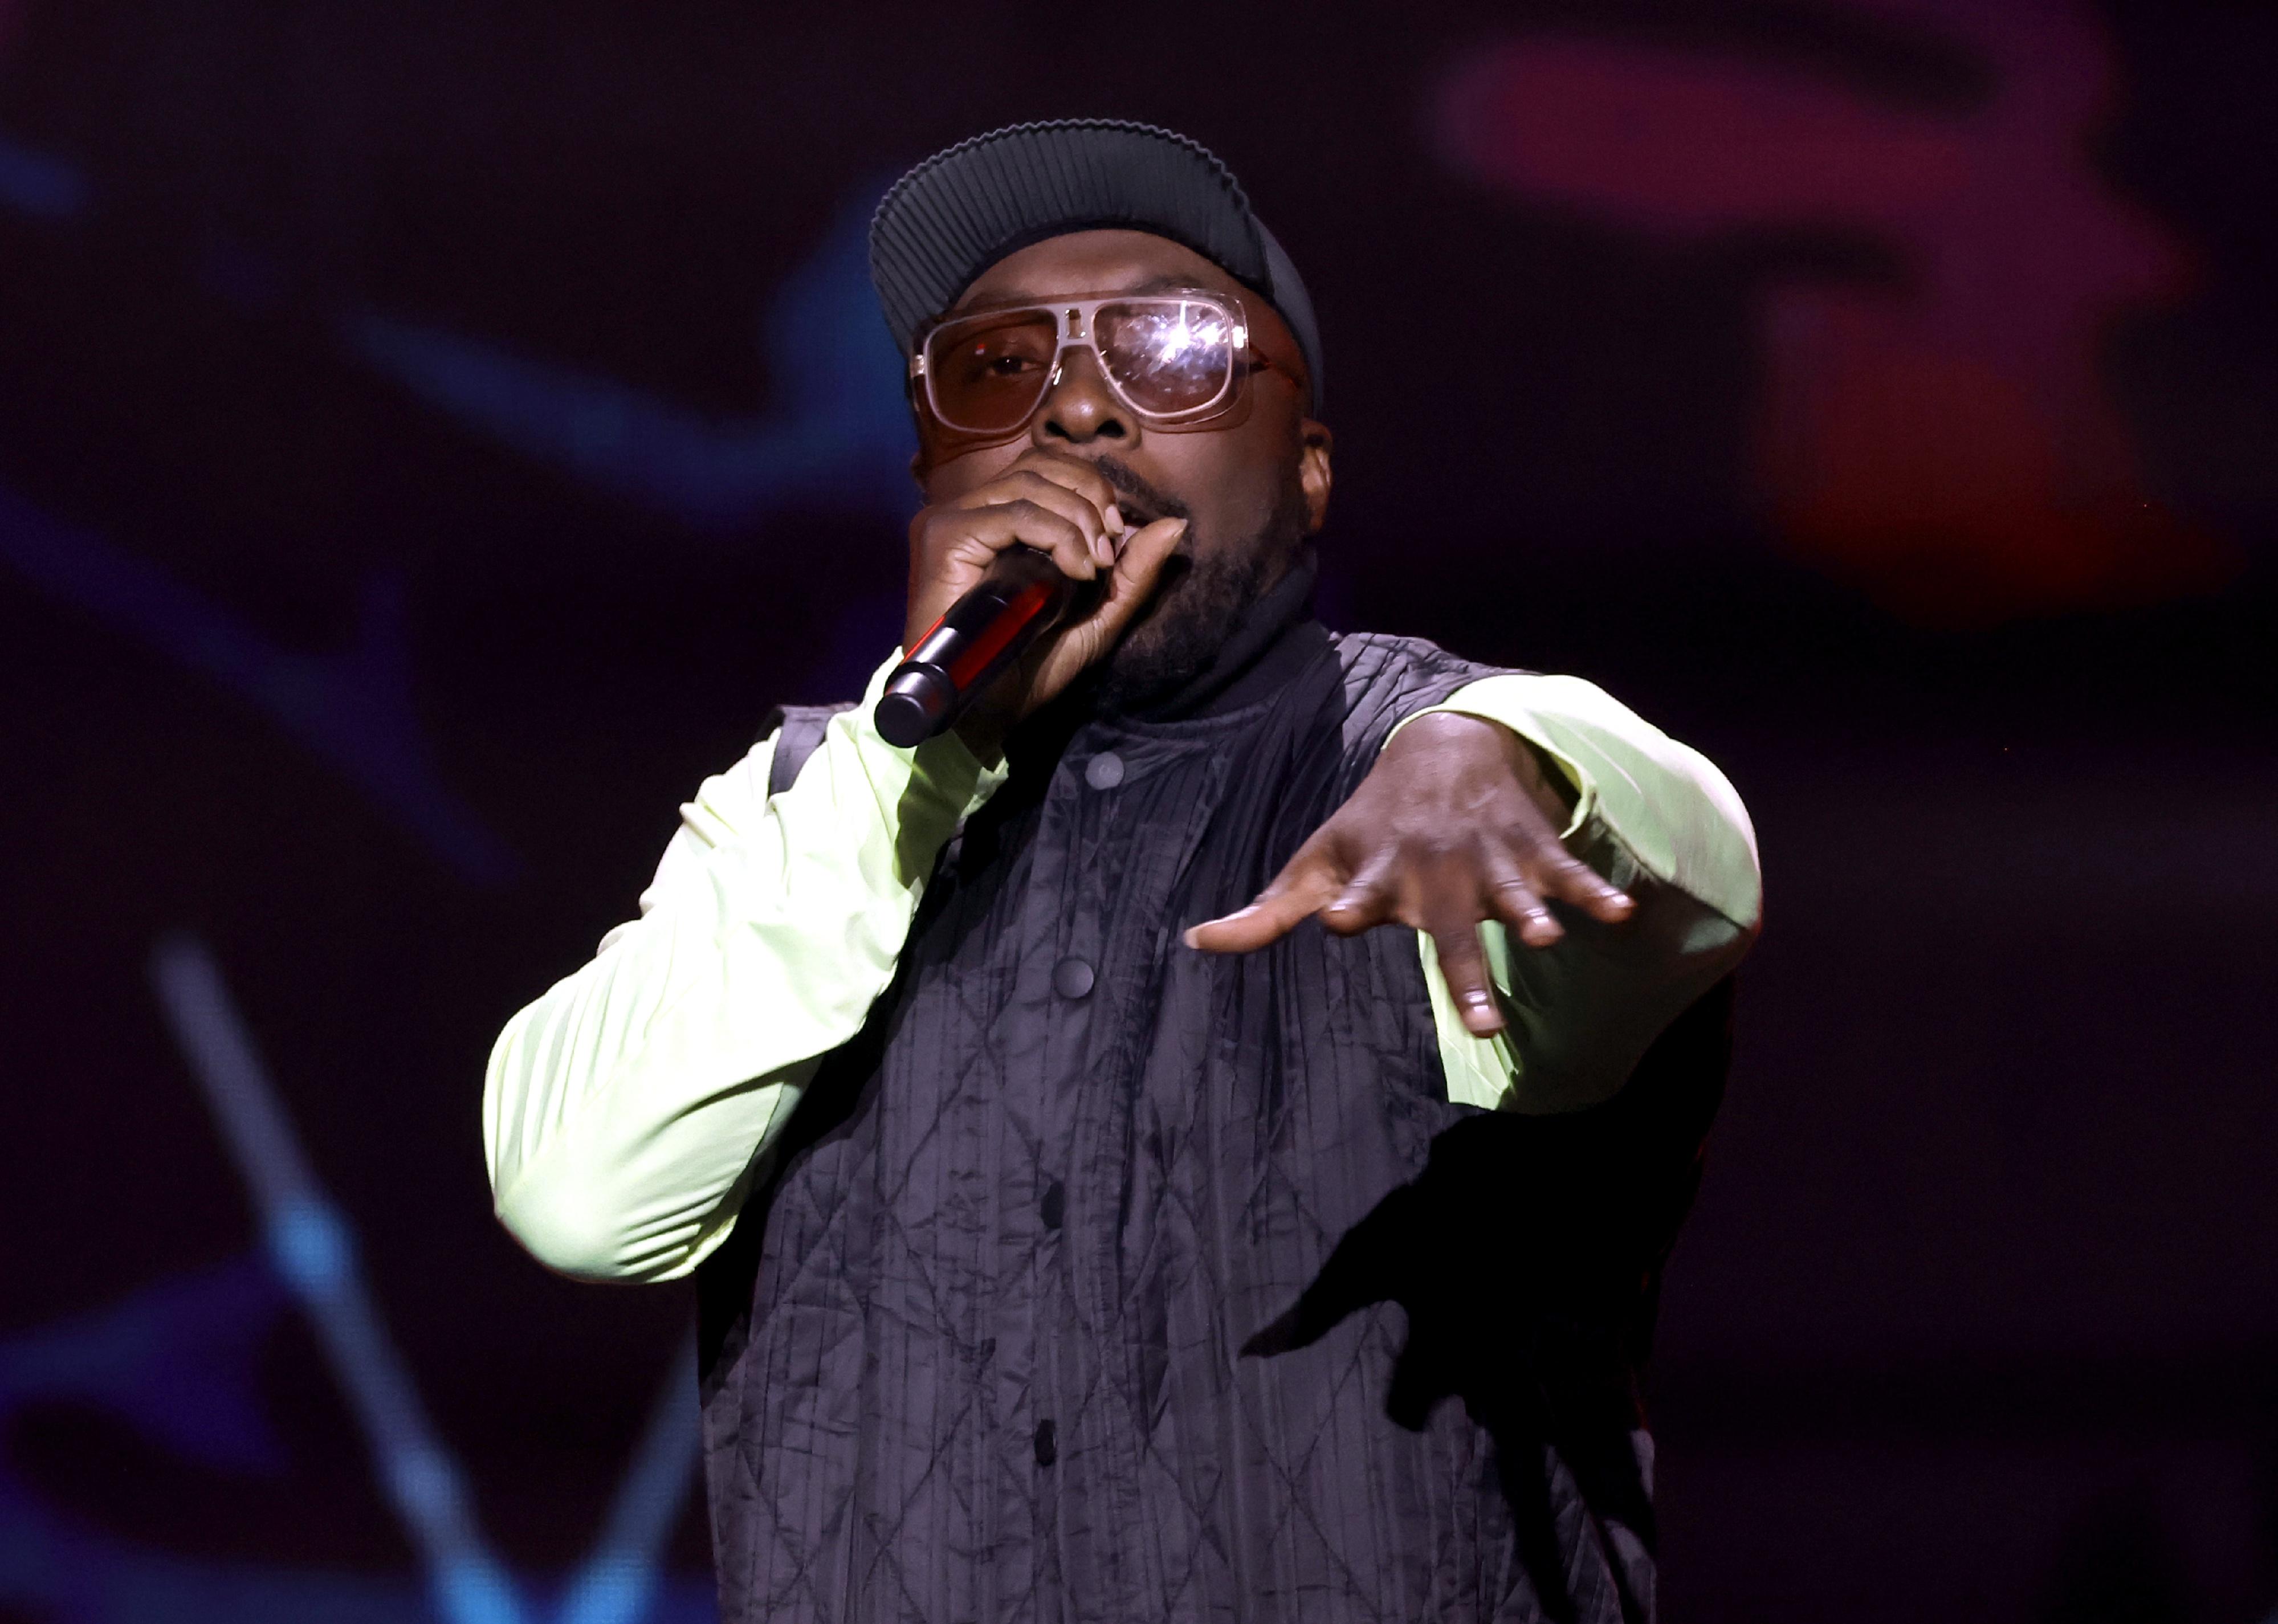 Will.i.am of Black Eyed Peas performs onstage during the 2022 iHeartRadio Music Festival.